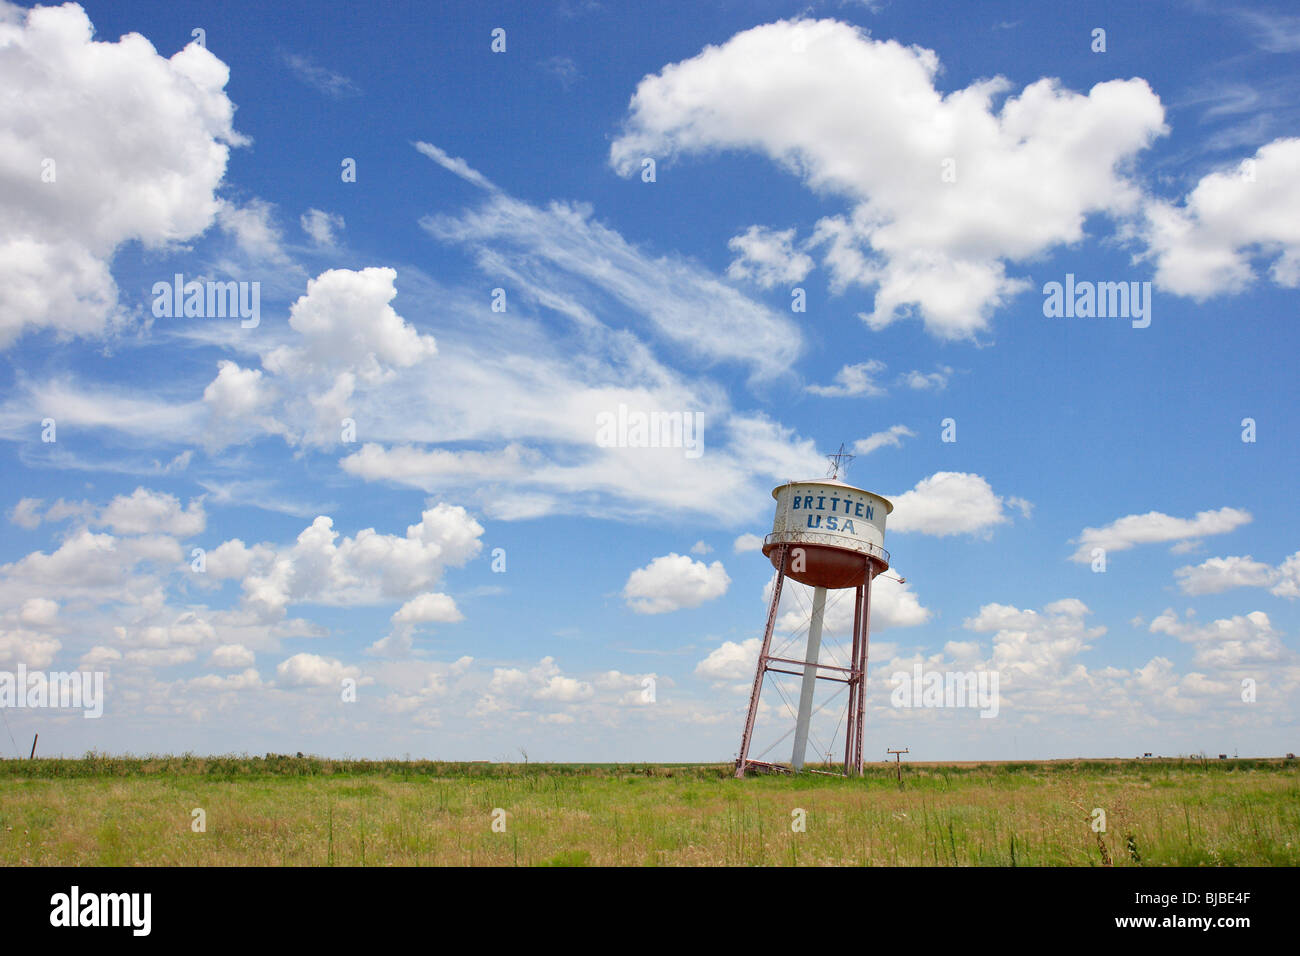 Leaning Water Tower, Groom, USA Banque D'Images